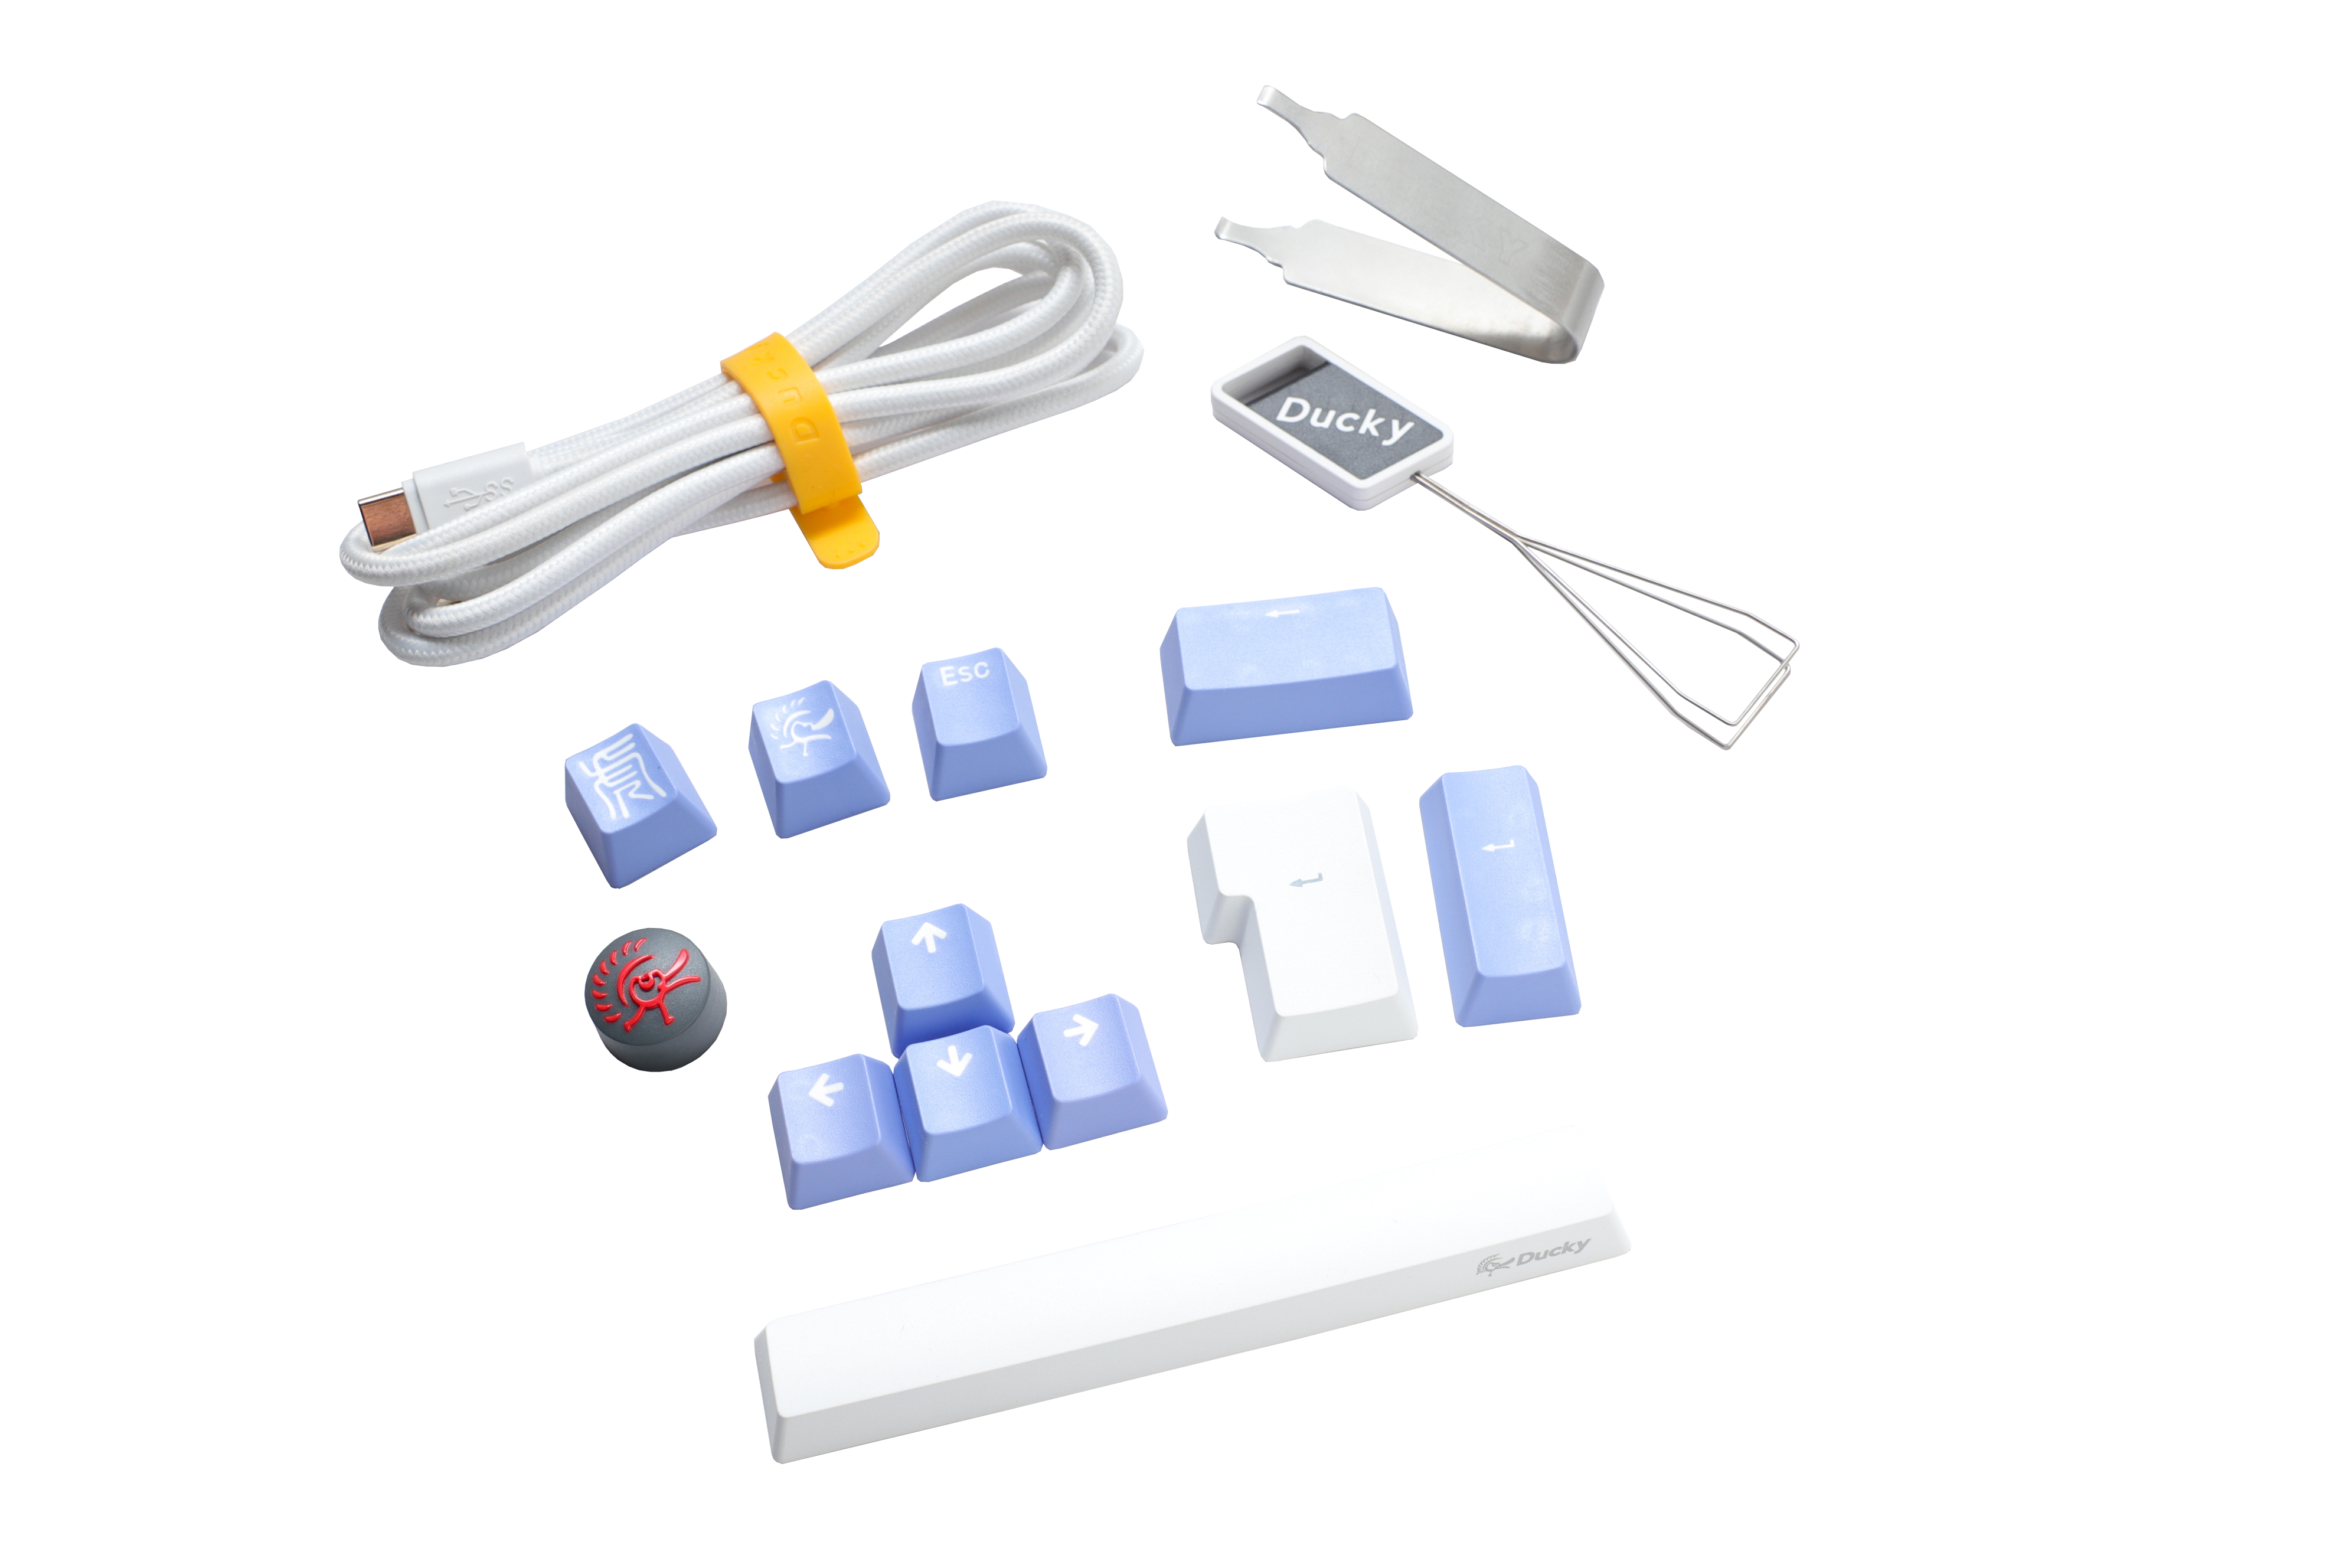 Various Ducky keyboard accessories including a USB cable, keycap puller, and replacement PBT keycaps in blue and white, displayed on a clean, white background.